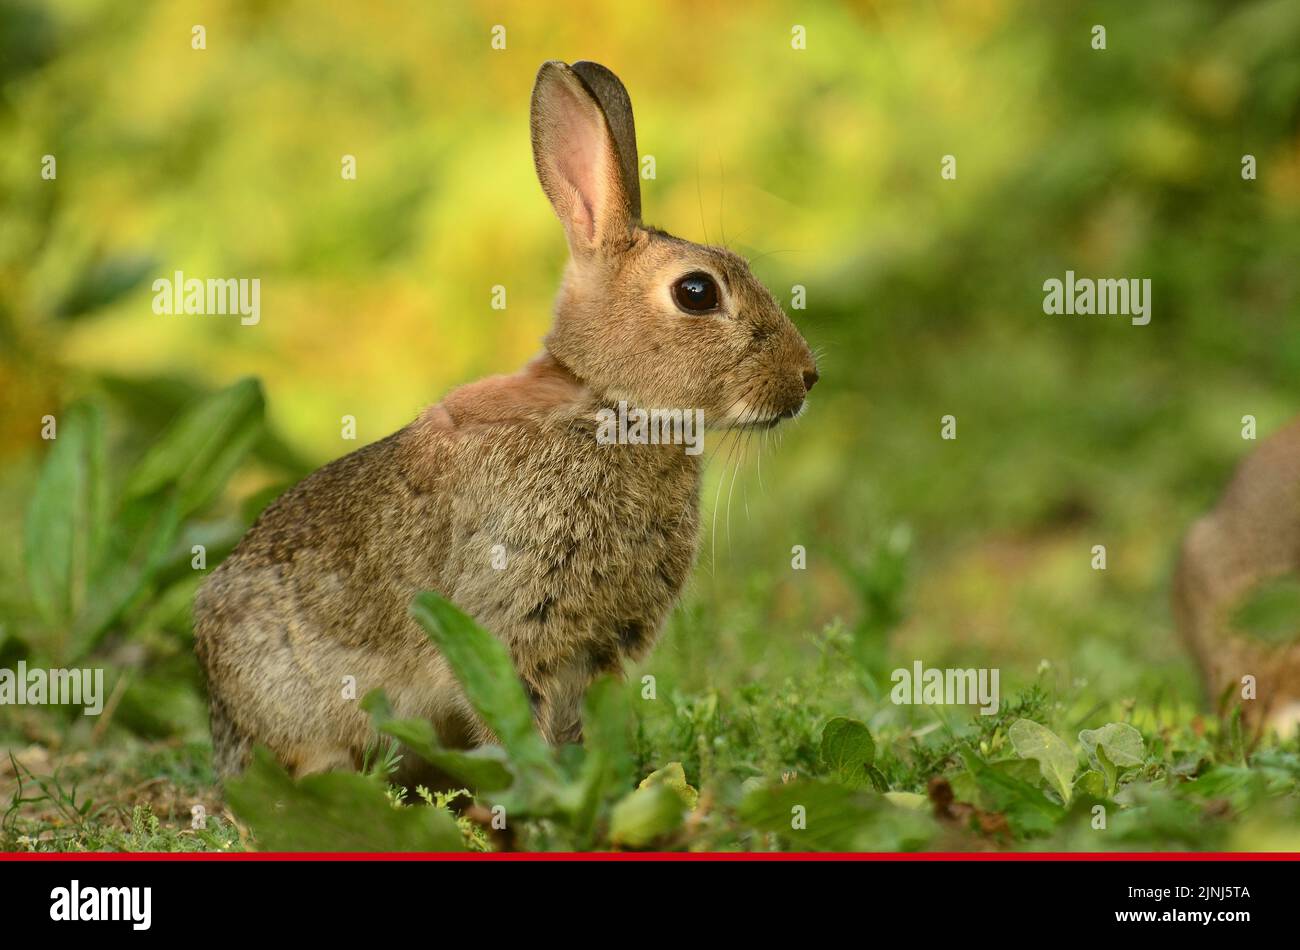 Young rabbit grazing in rough ground alert Stock Photo